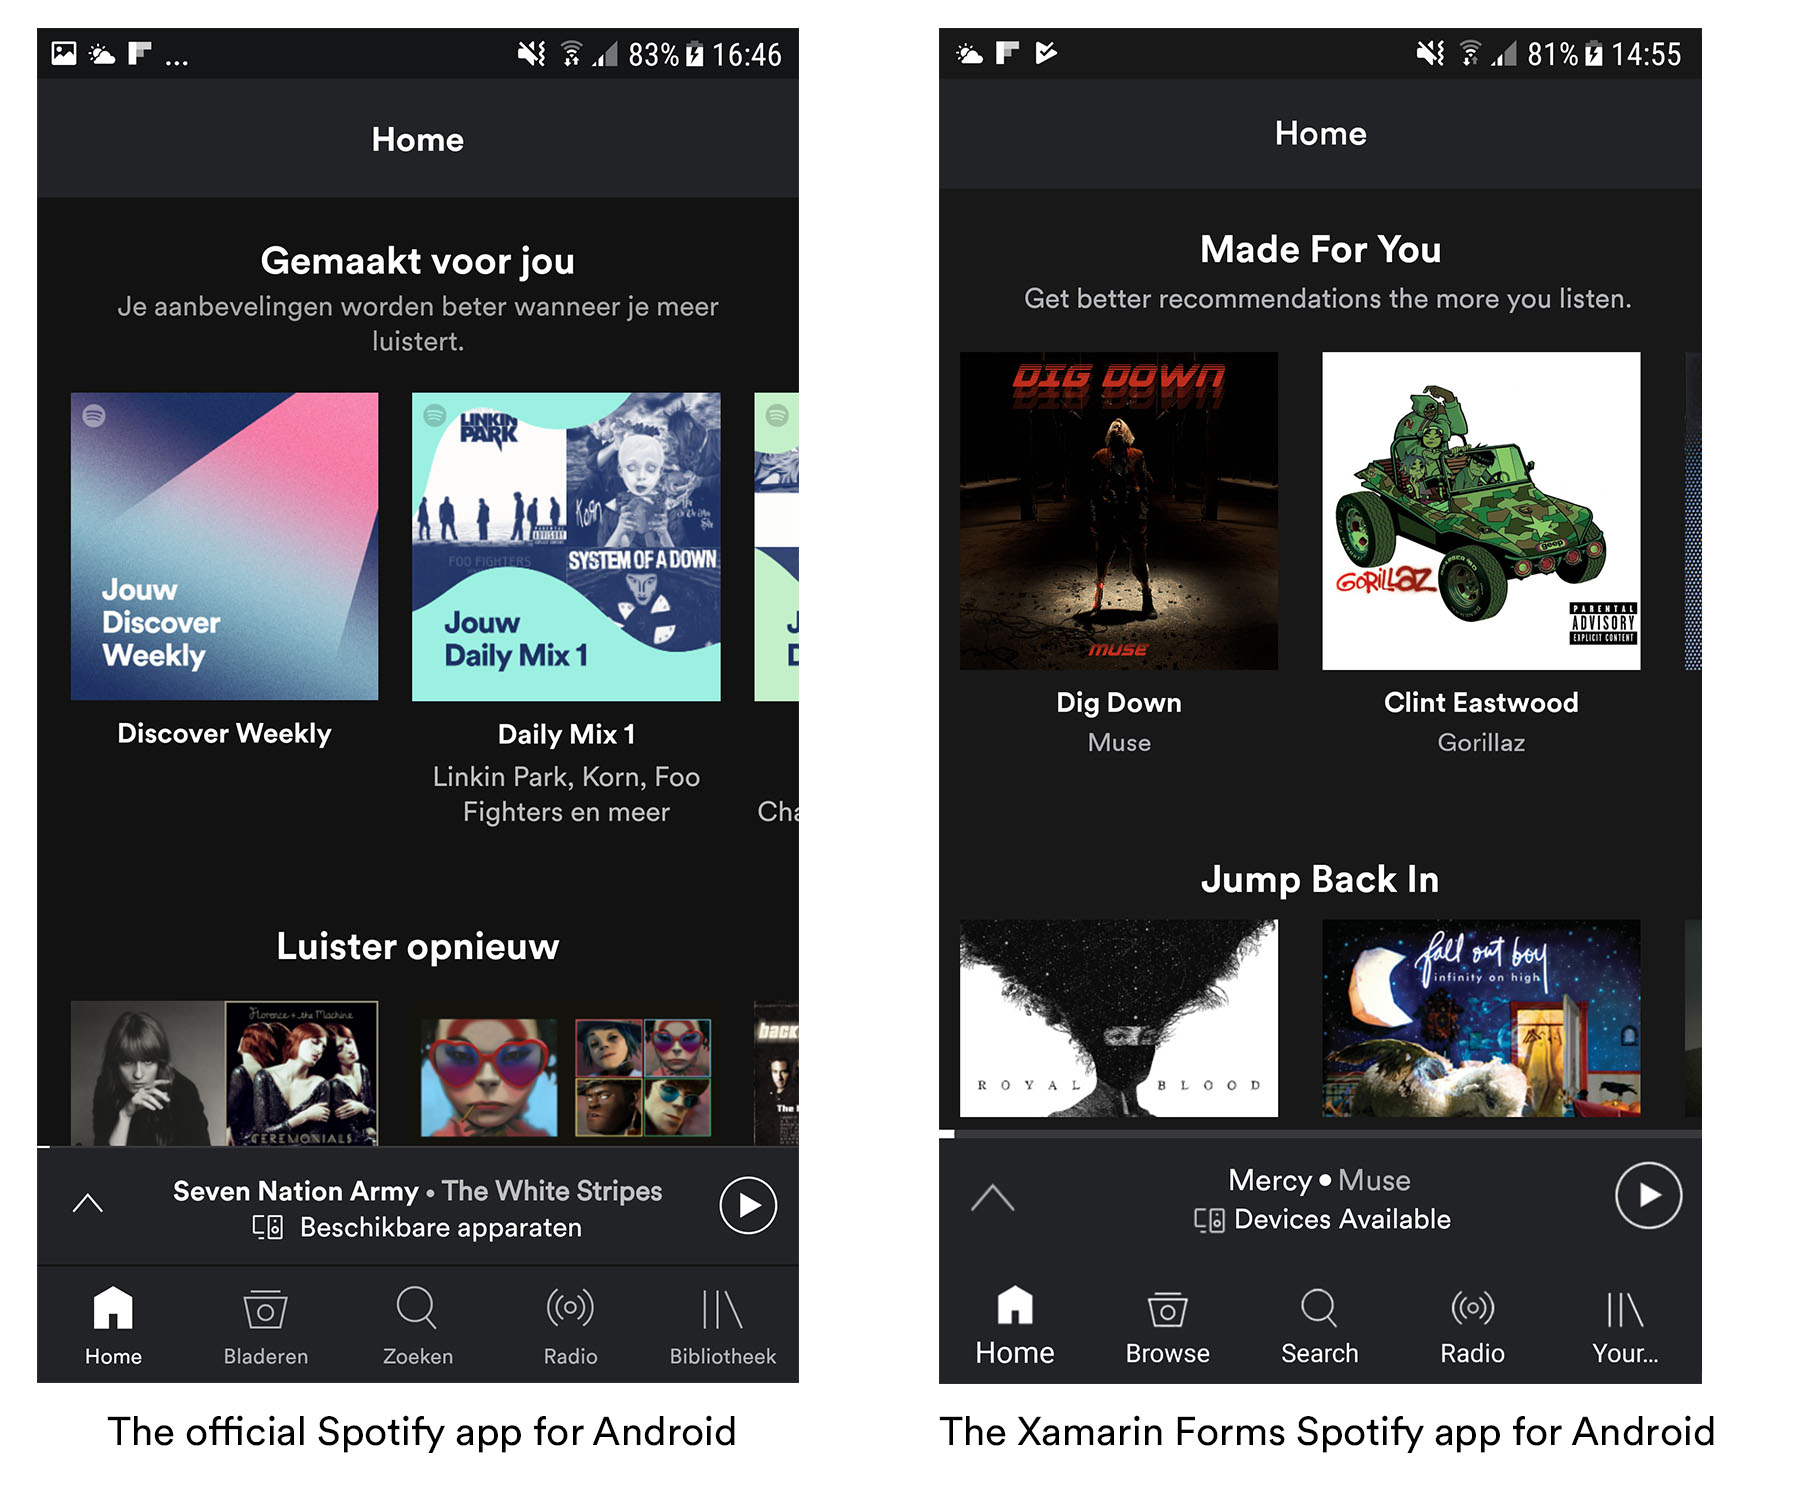 The Spotify UI on Xamarin Forms